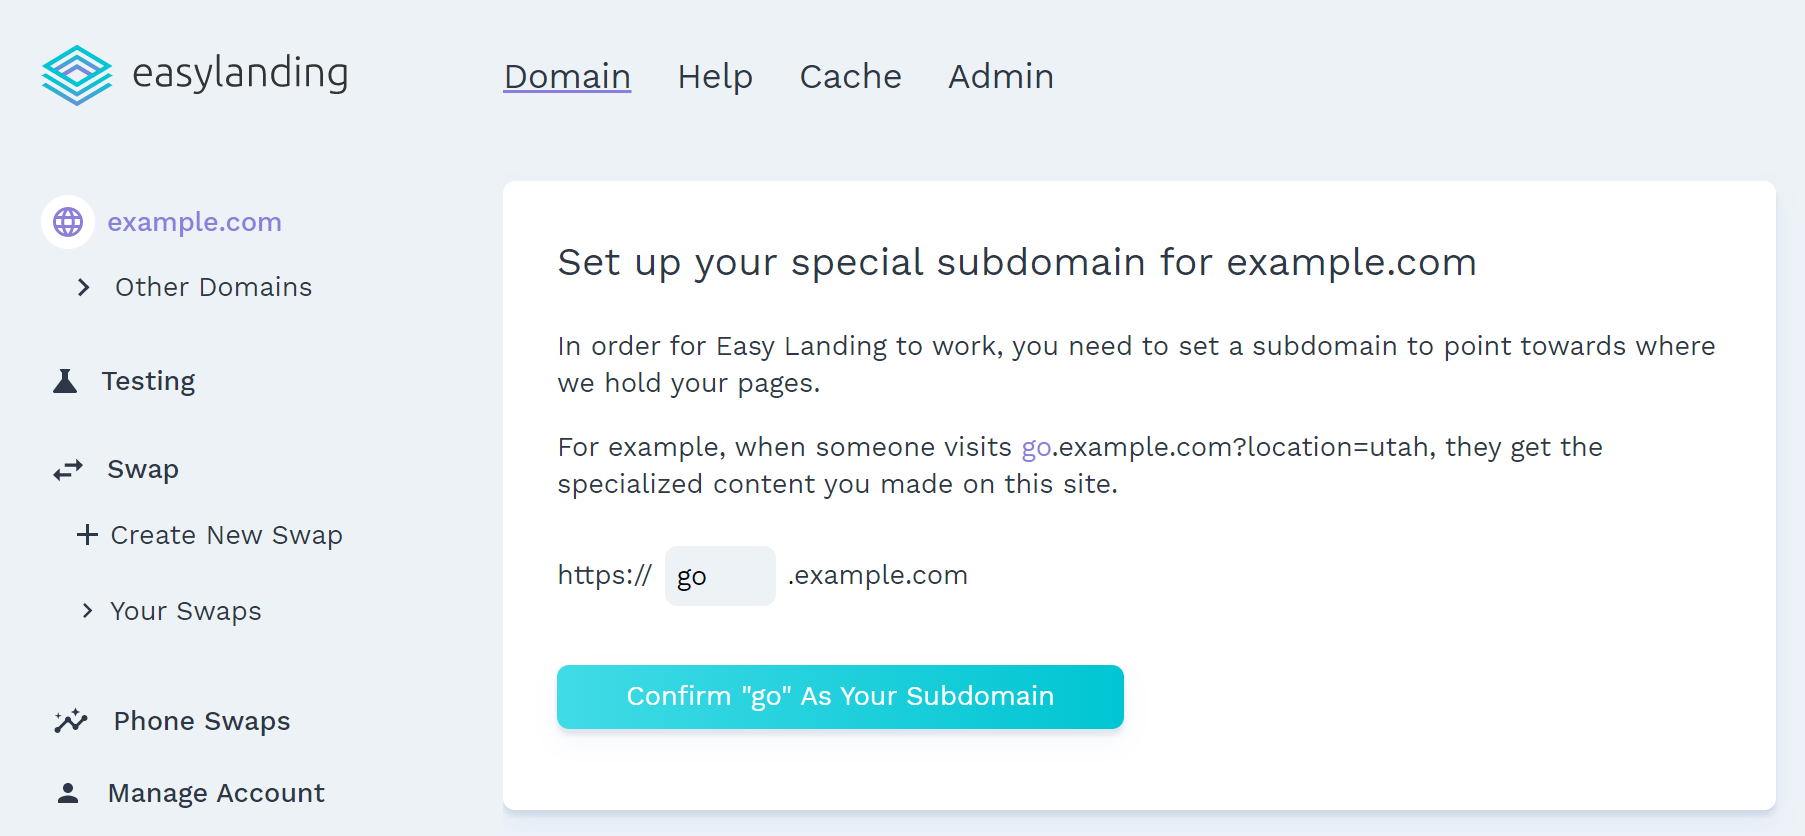 dialog box asking to set a user's subdomain on Easy Landing